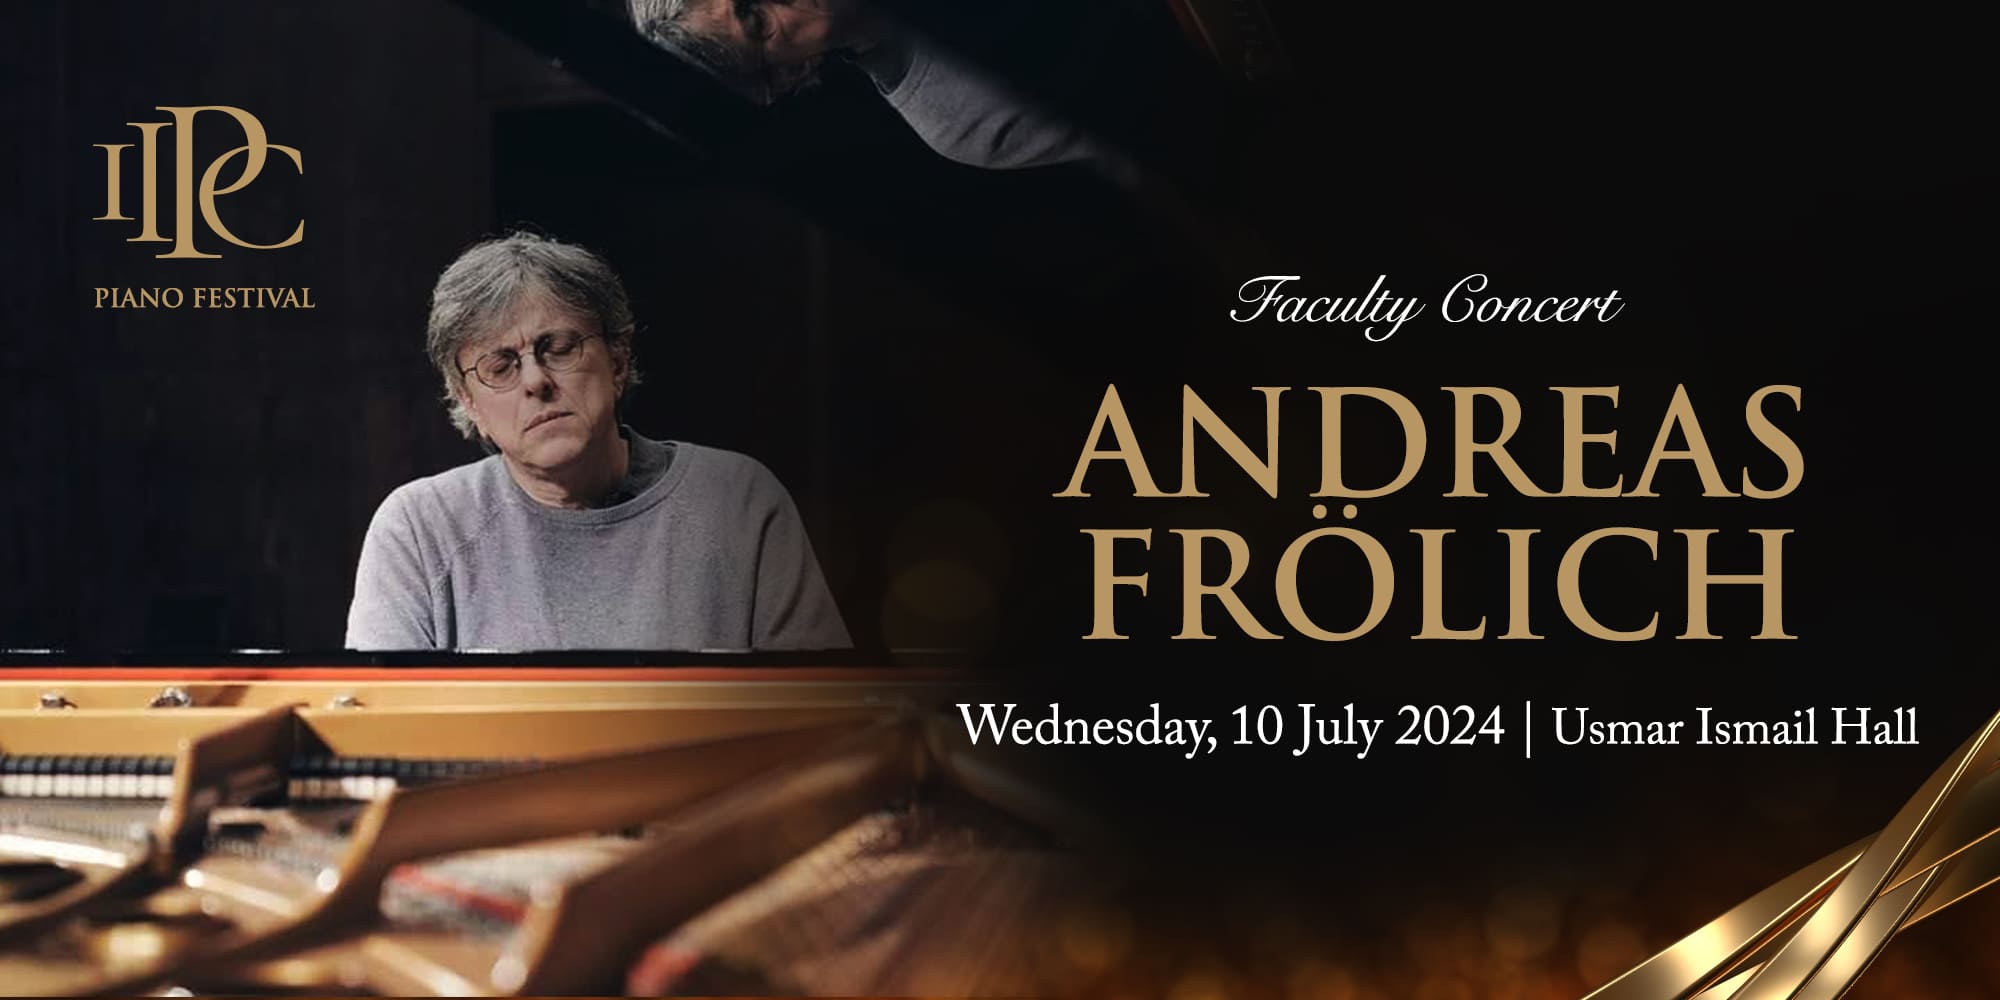 Faculty Concert Andreas Folich